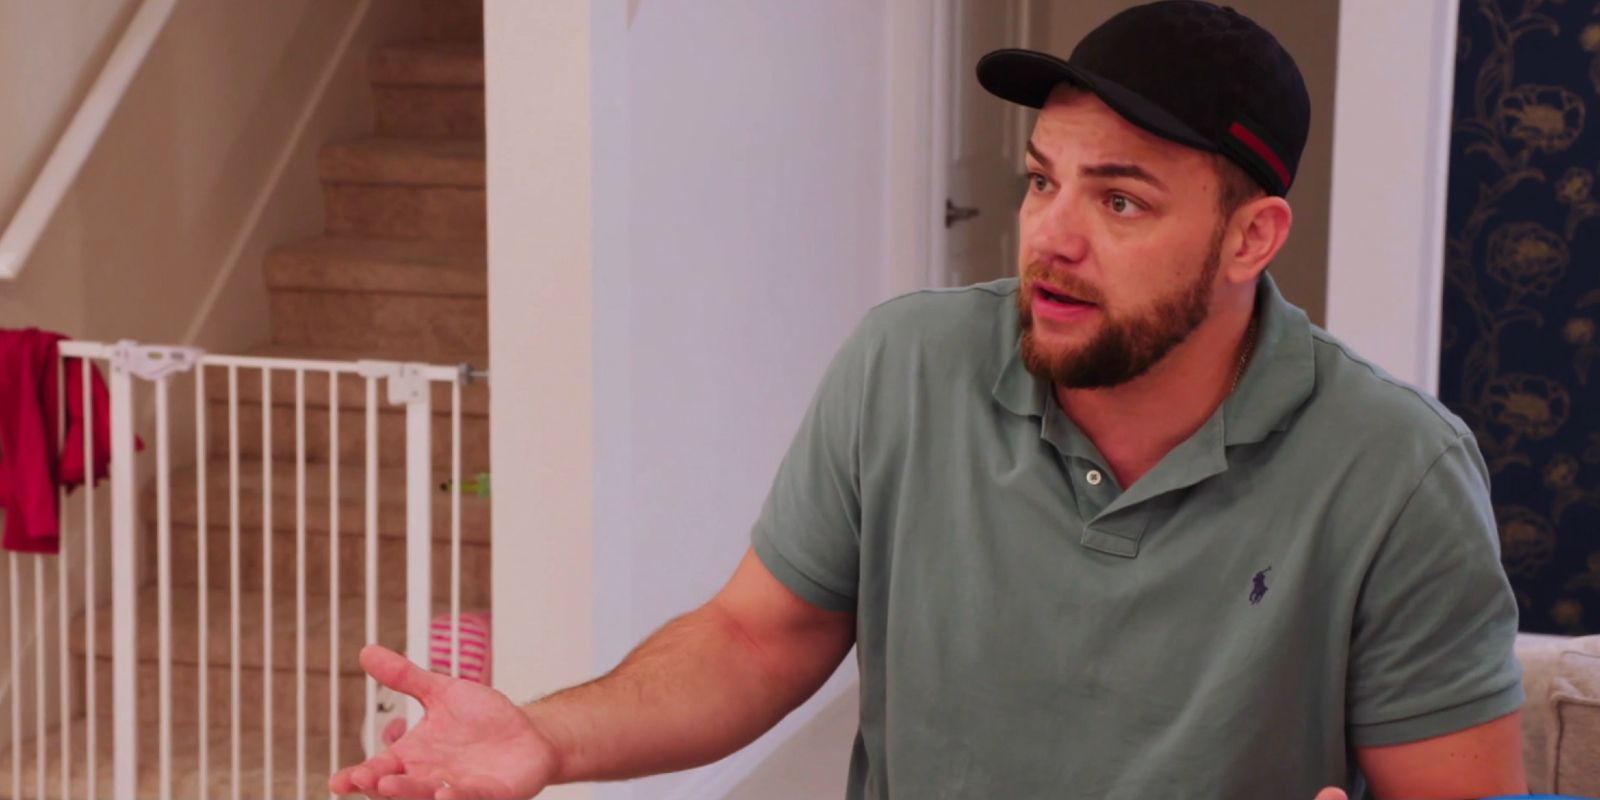 Andrei Castravet from 90 Day Fiancé: Happily Ever After wearing green shirt and cap